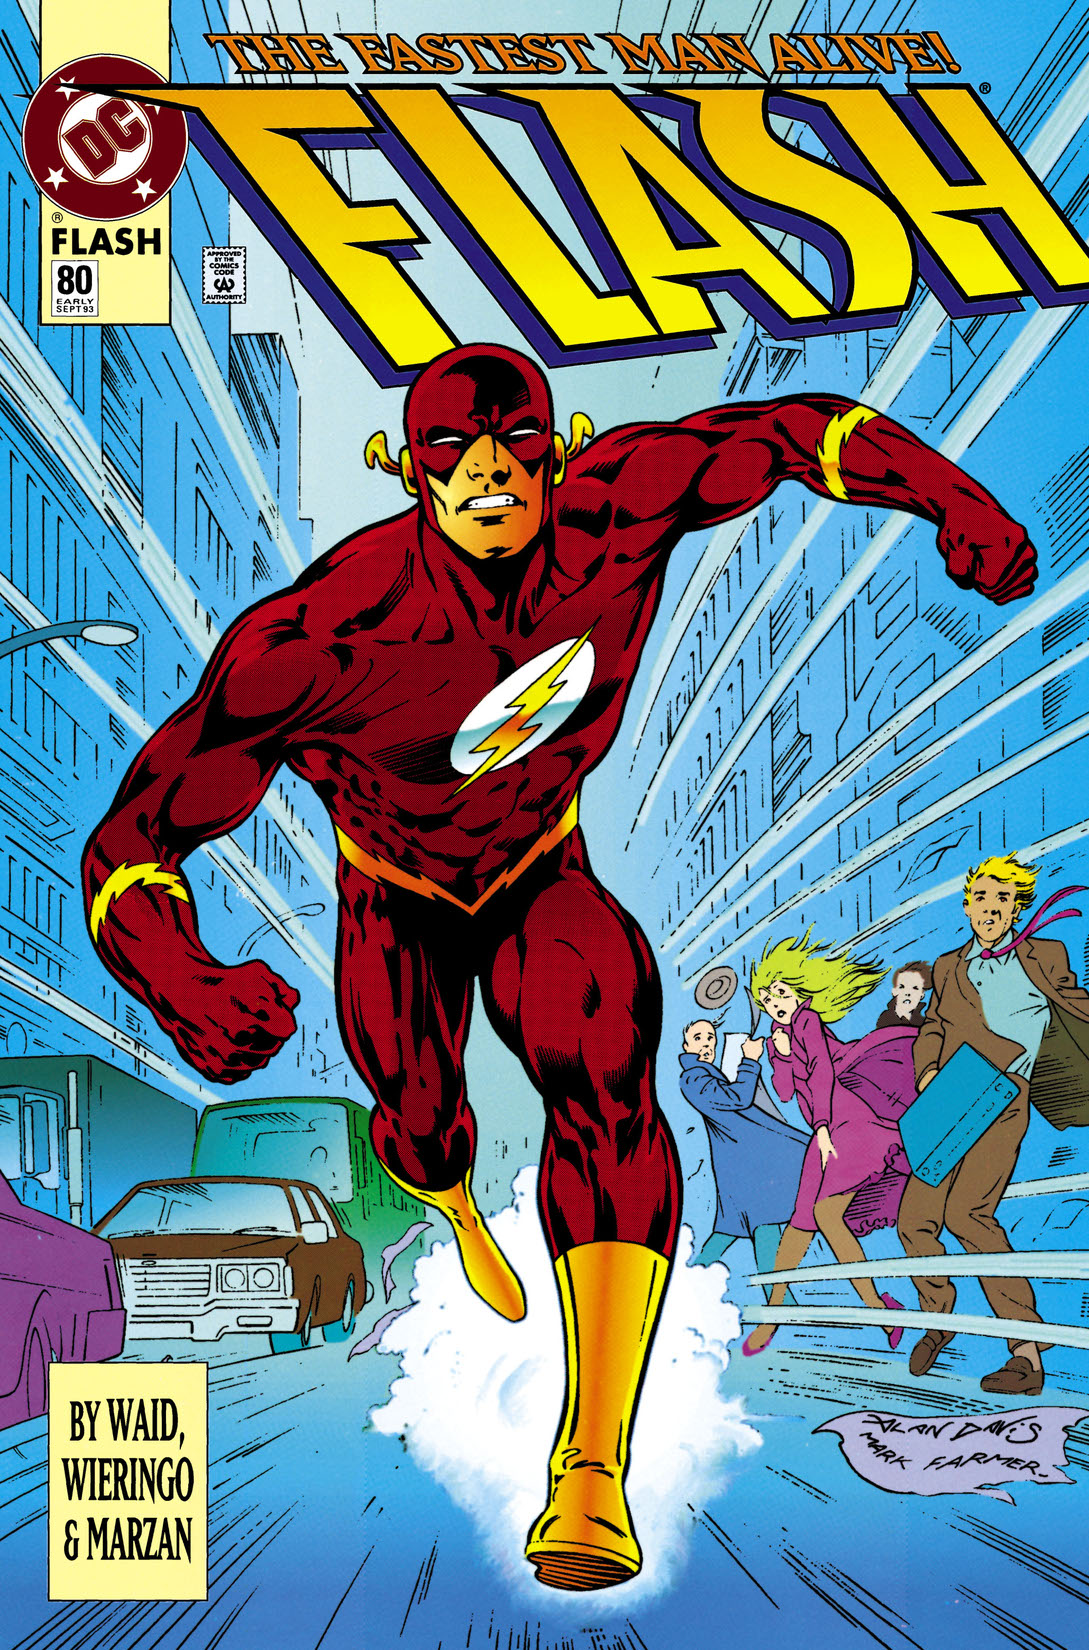 The Flash (1987-2008) #80 preview images